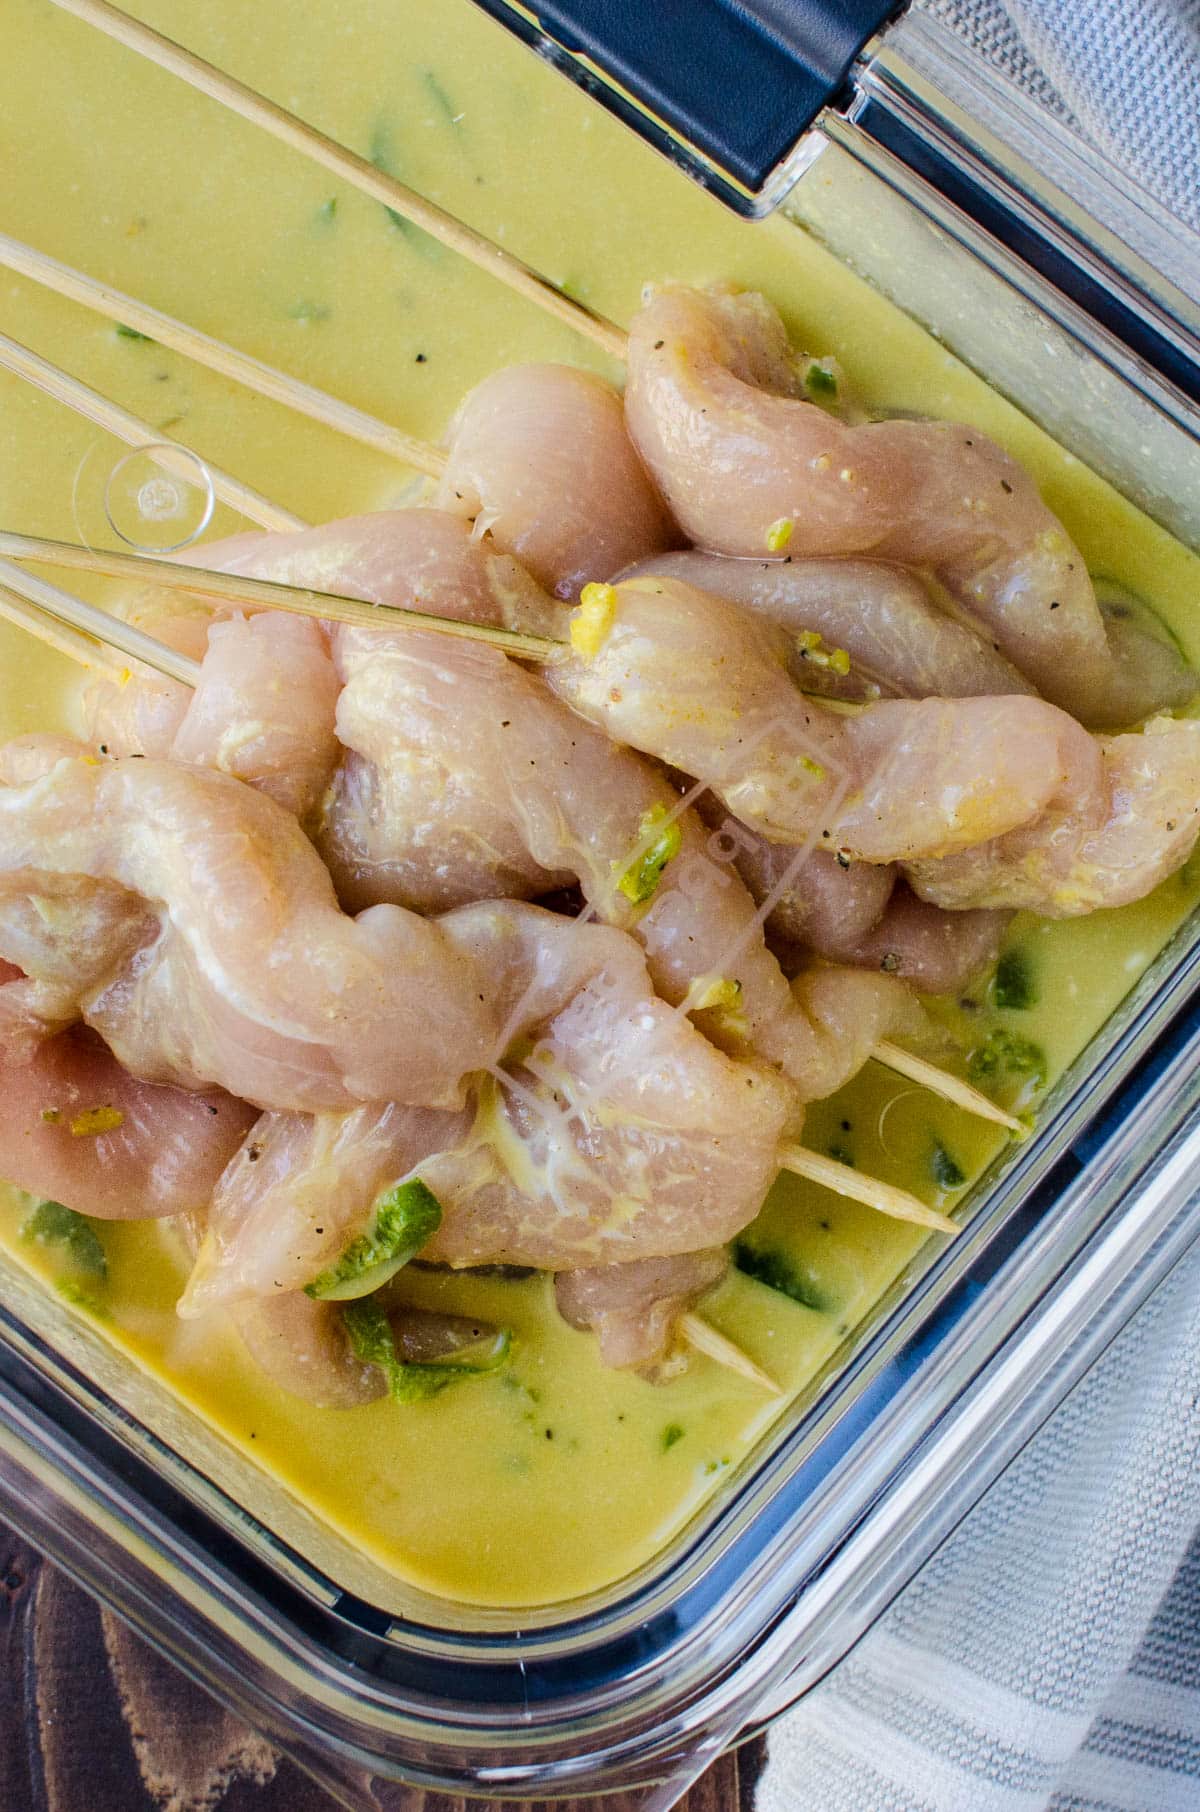 I am marinating the chicken skewers.